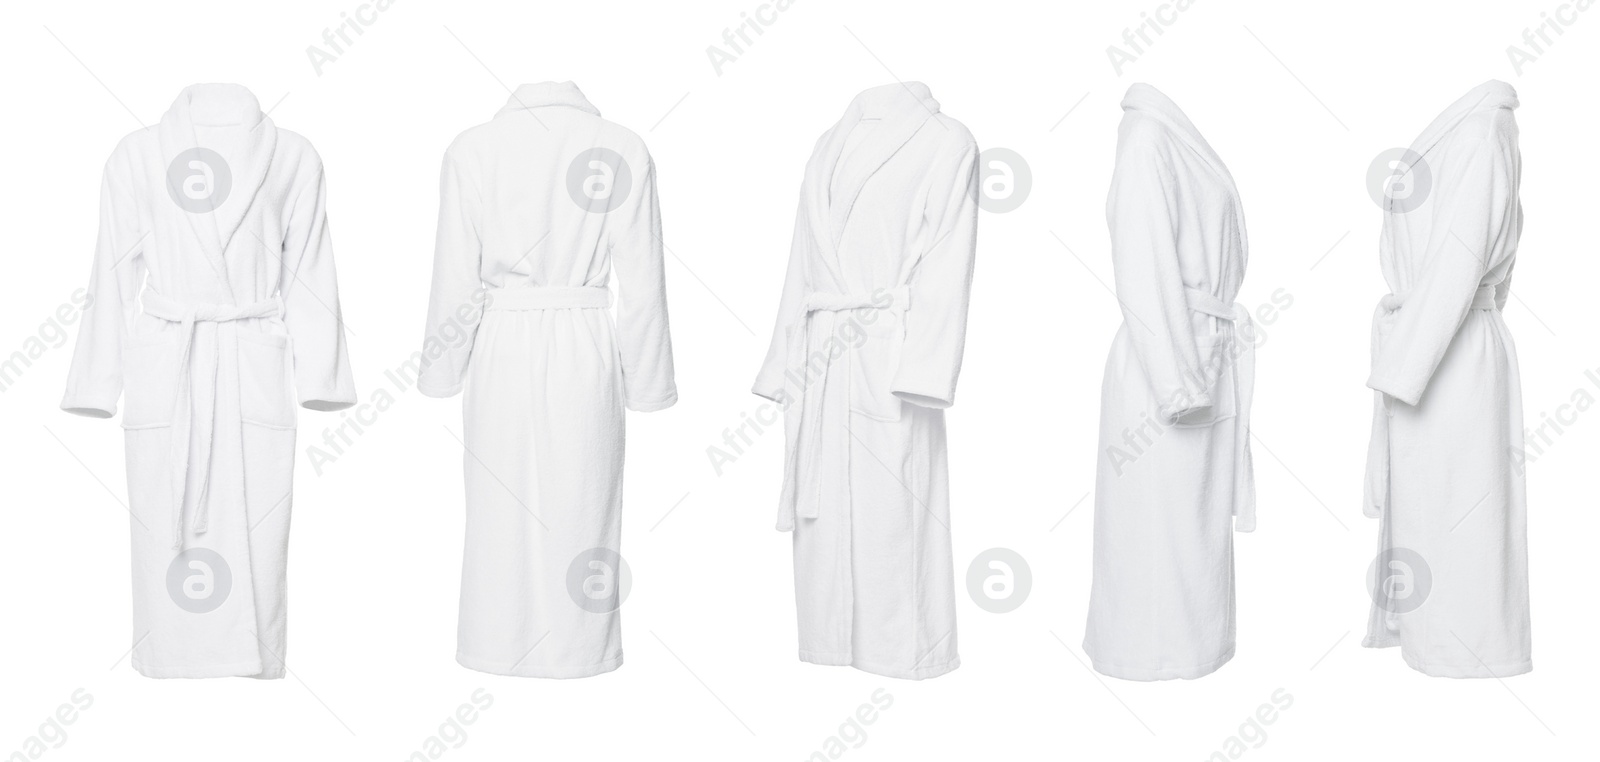 Image of Collage with clean terry bathrobe on white background, different views